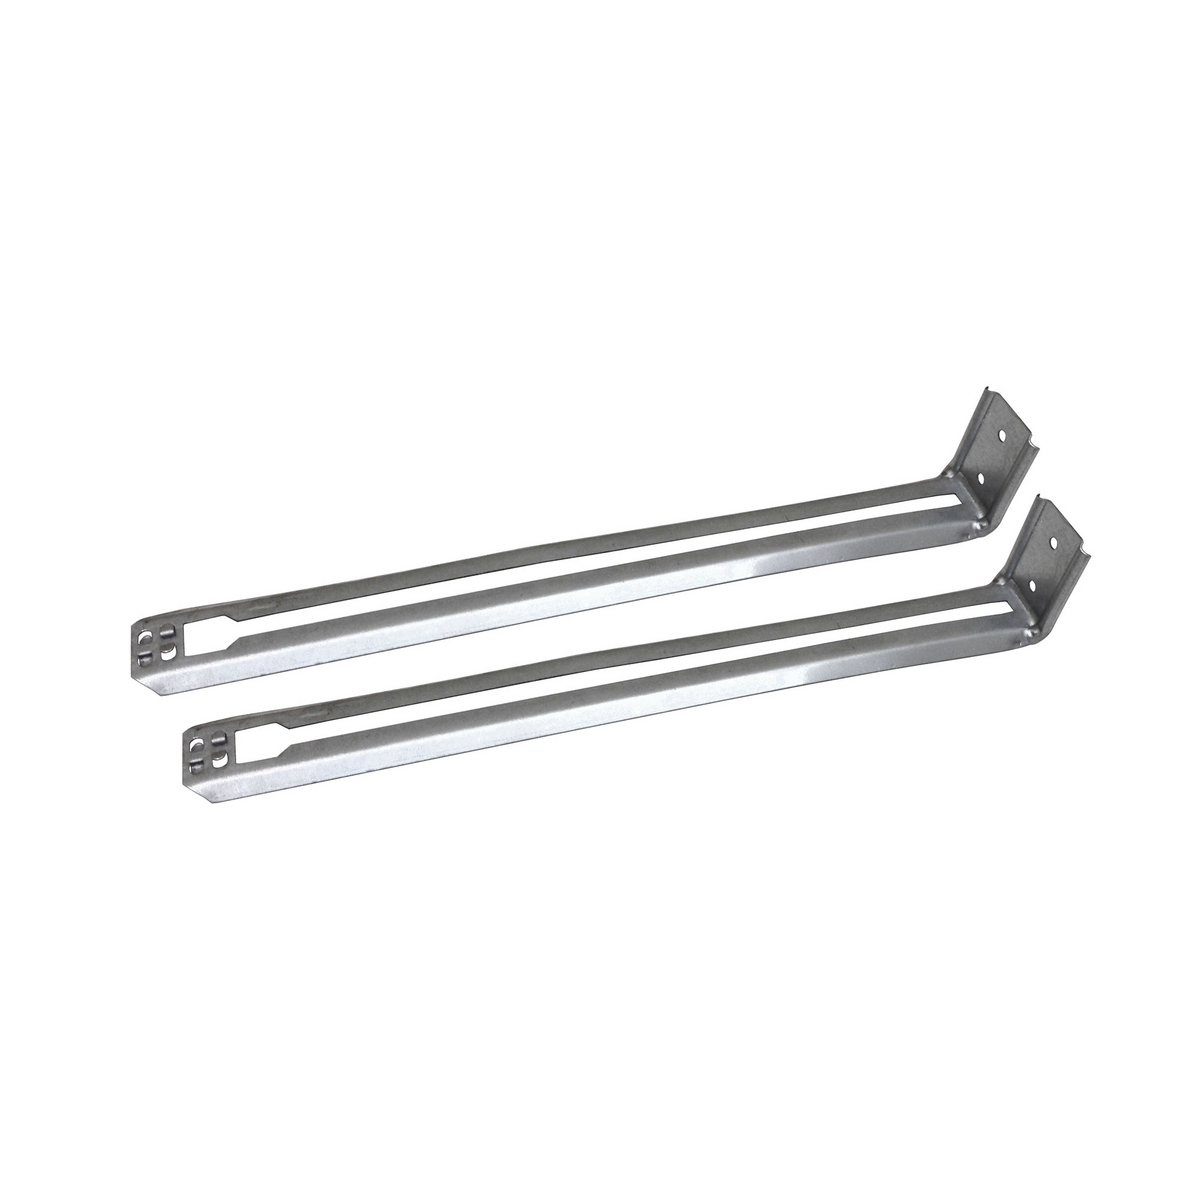 Recessed accessory - Bar hangers for joist for use with separate recessed housings and trims.